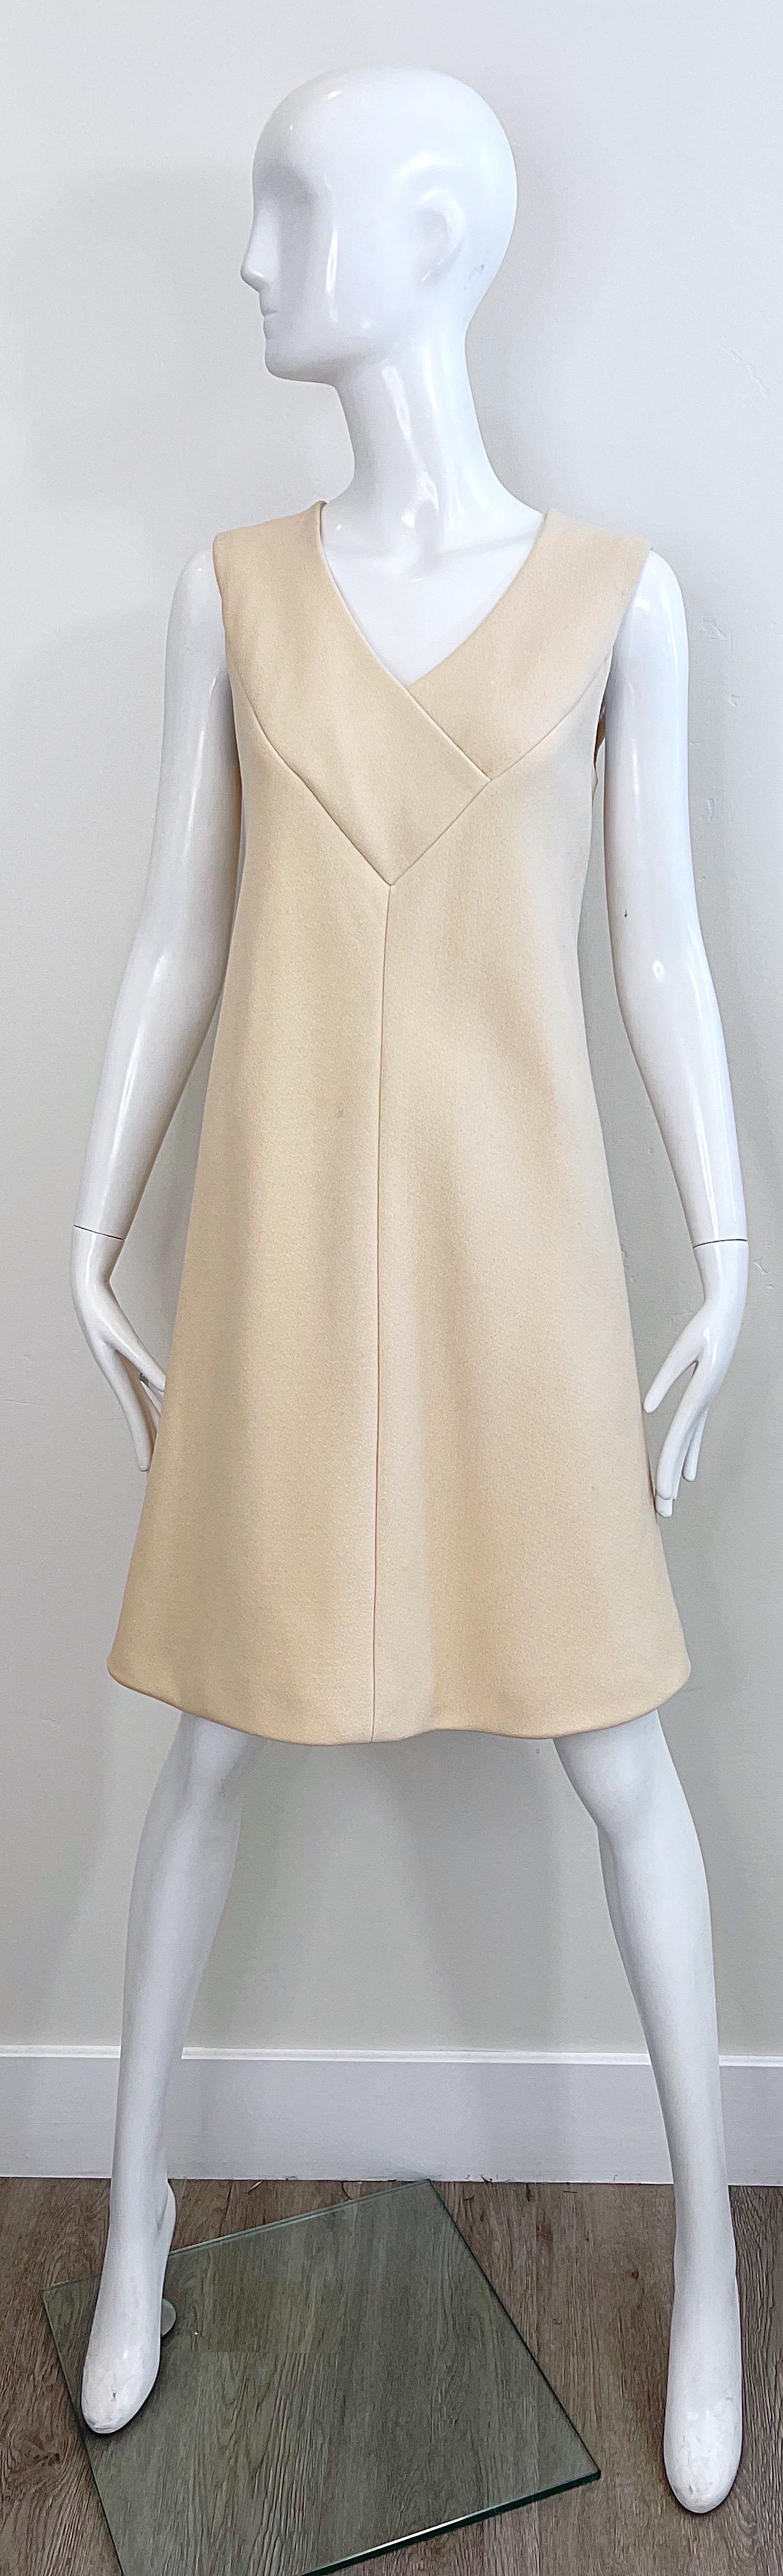 Pauline Trigere 1960s Ivory Off White Sleeveless Vintage Wool A - Line 60s Dress For Sale 5